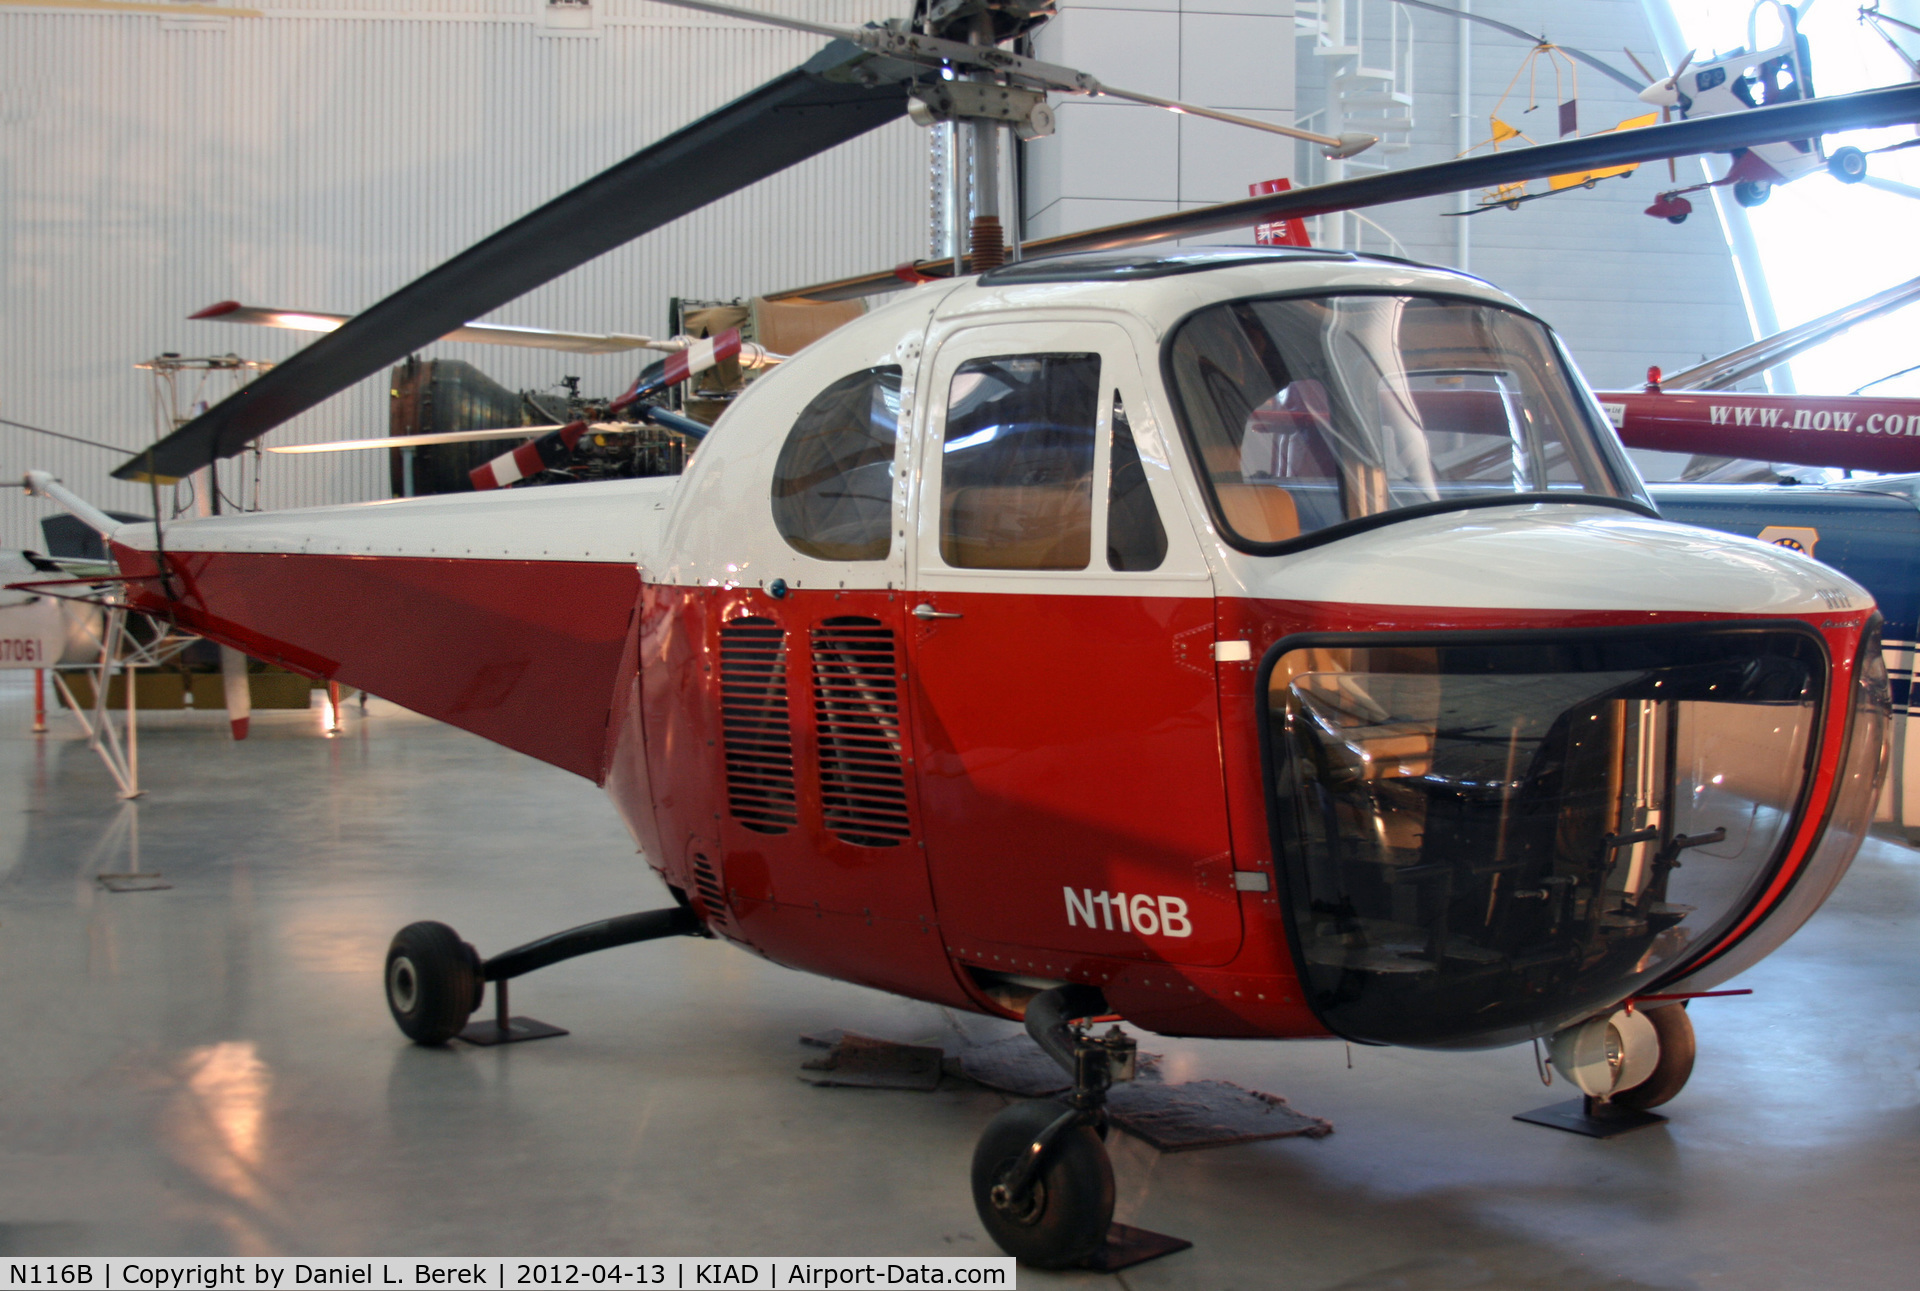 N116B, 1947 Bell 47B C/N 36, This aircraft enjoyed a 57-year flying career, the longest for any rotorcraft.